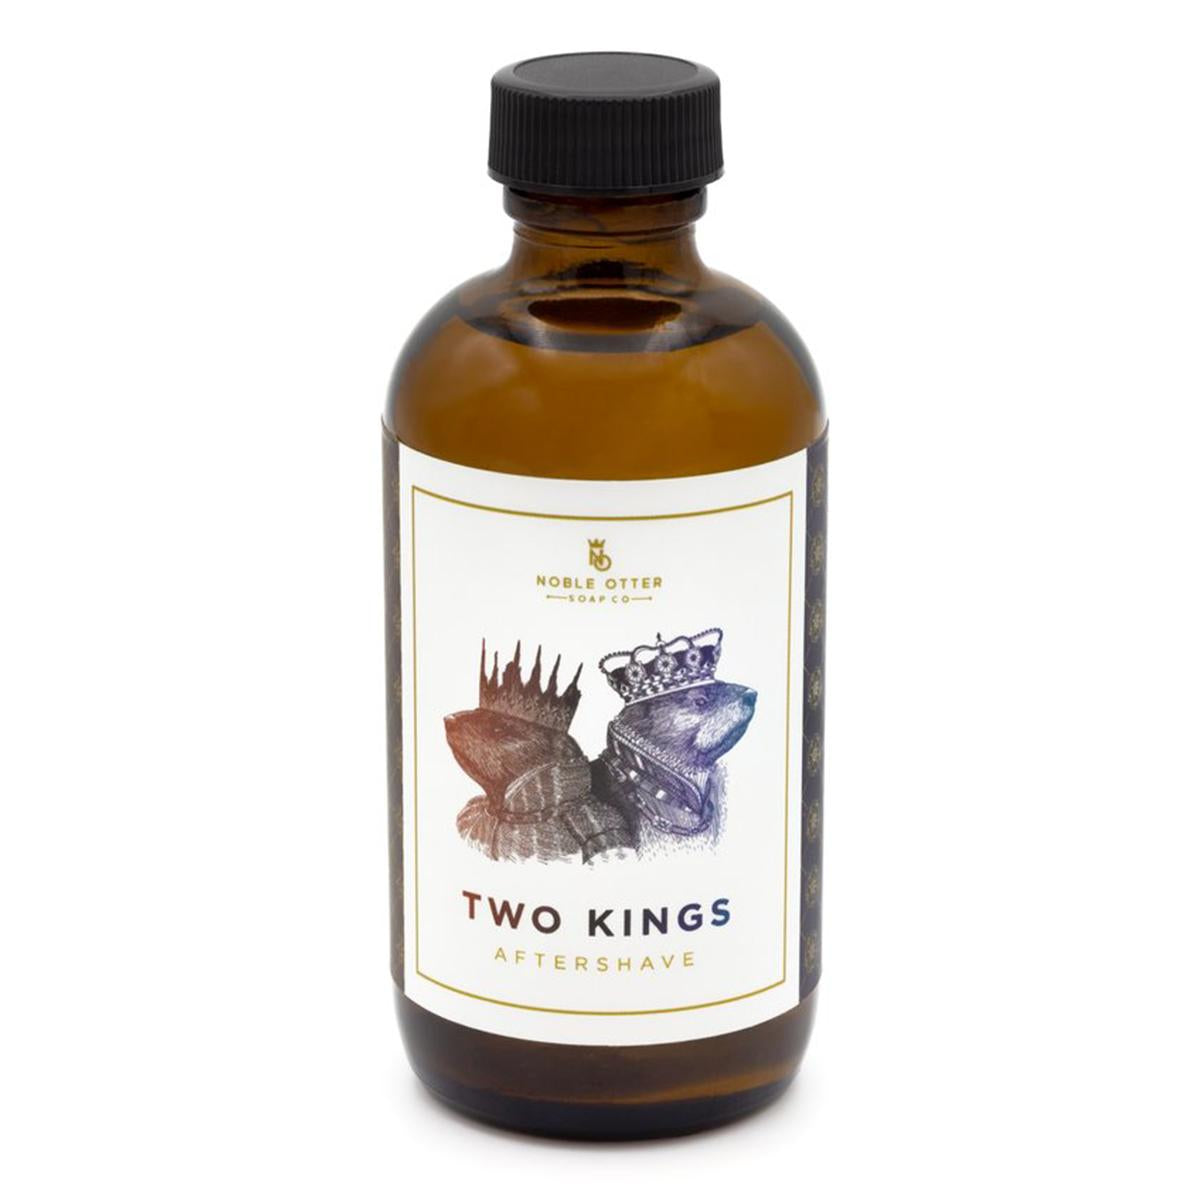 Primary image of Two Kings Aftershave